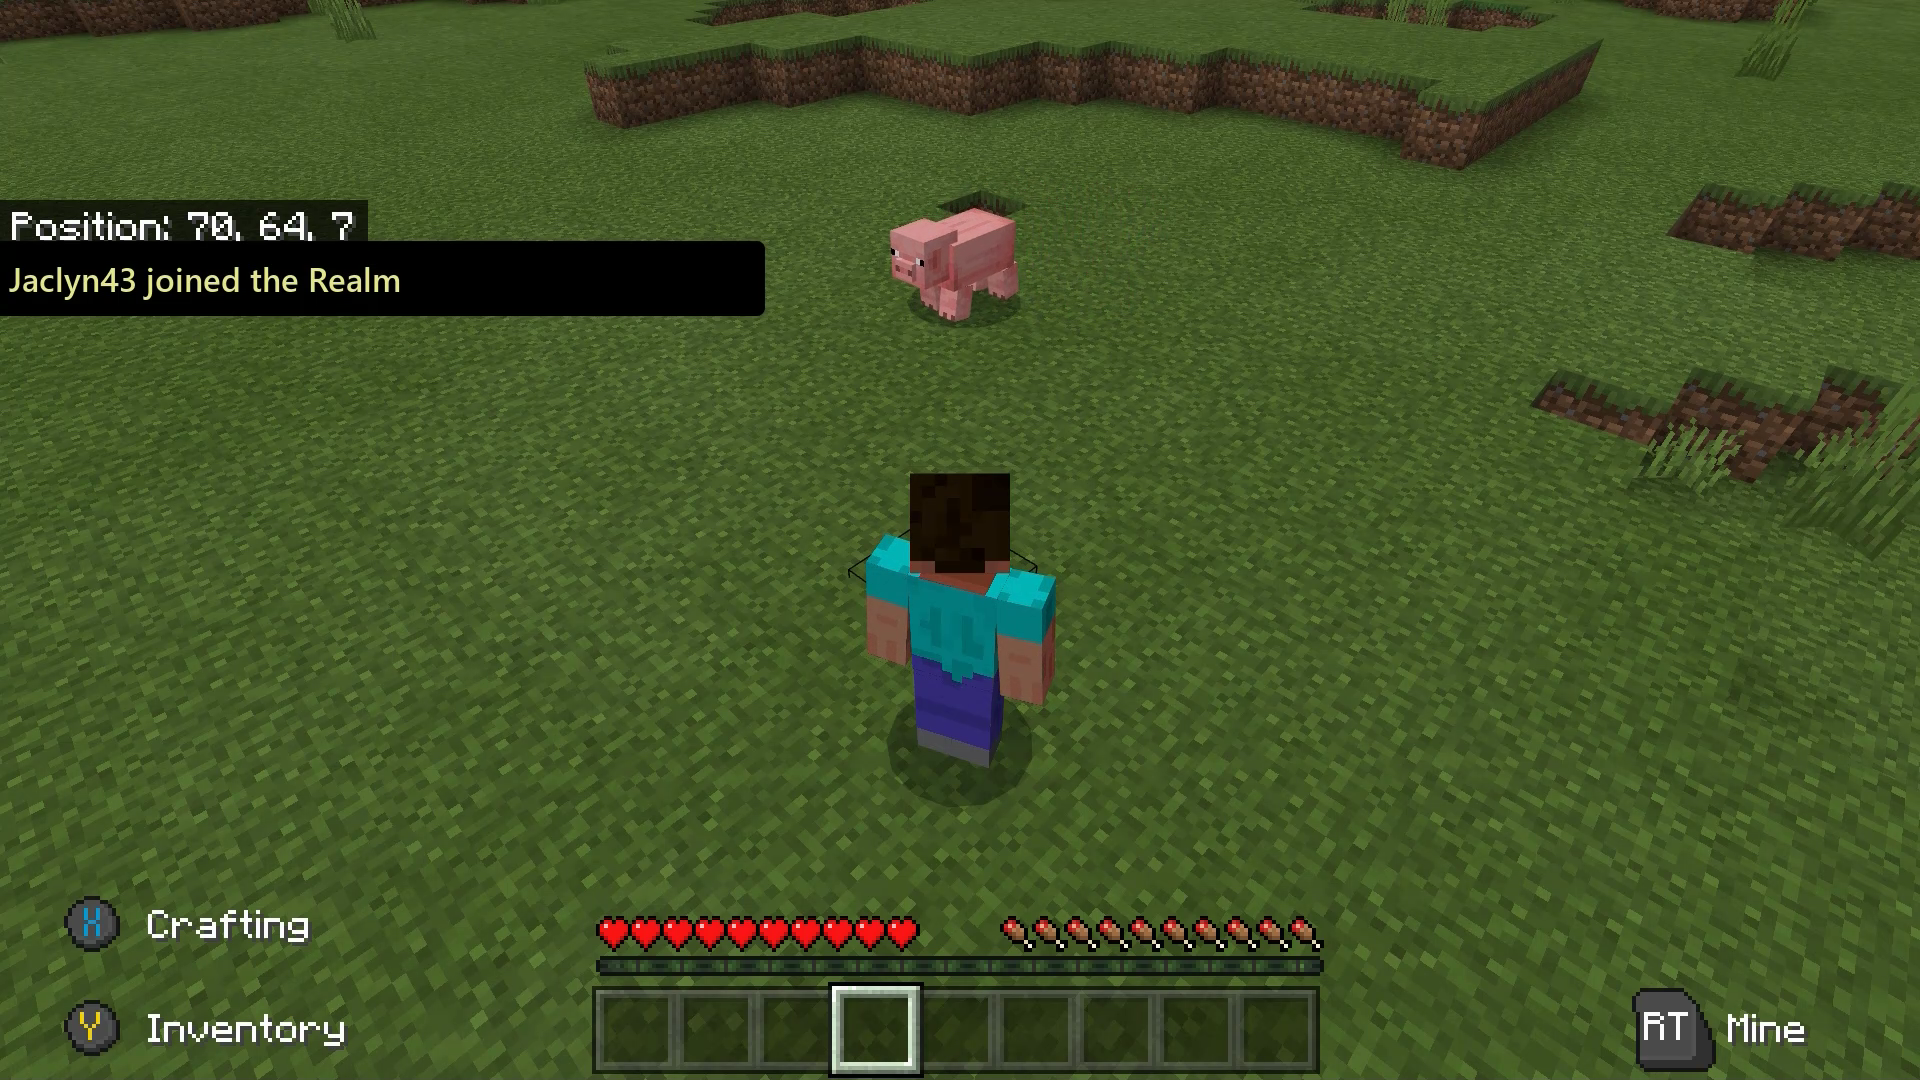 A Minecraft character, Steve, stands in a field. There's a notification that a player had joined the realm.